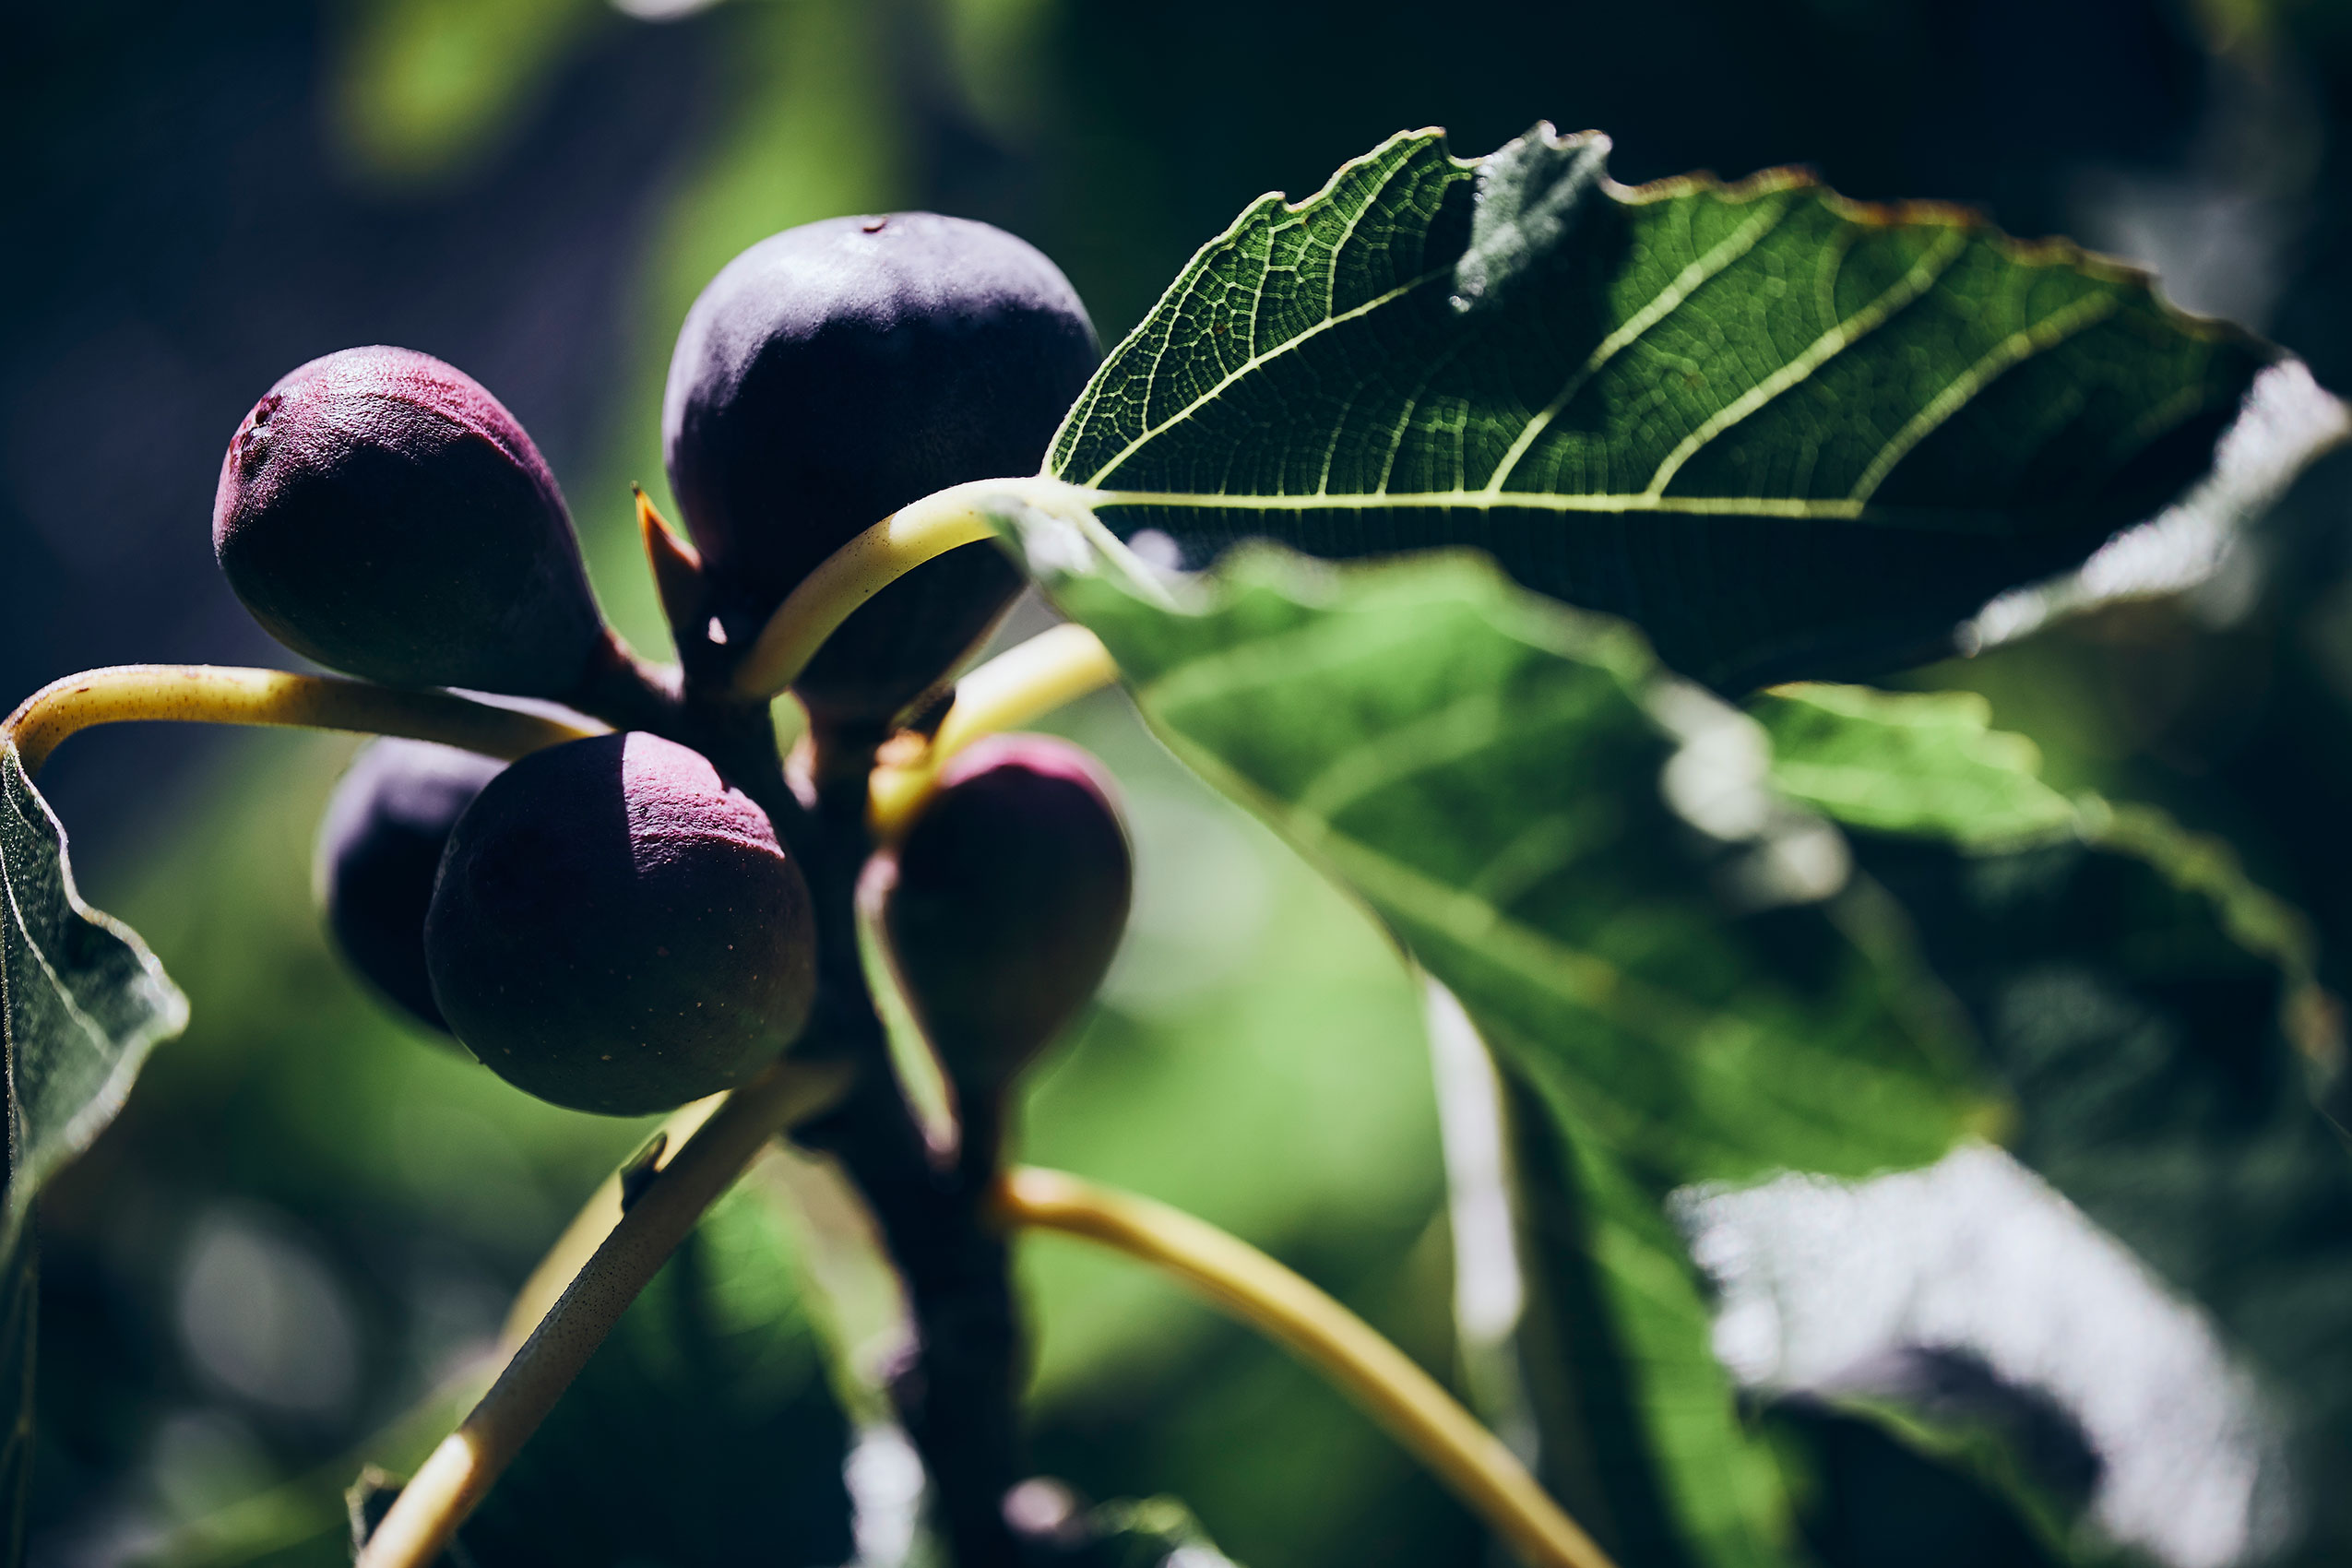 Shared Kitchen • Soft Sunlight on Luscious Purple Figs on Tree • Lifestyle & Editorial Food Photography